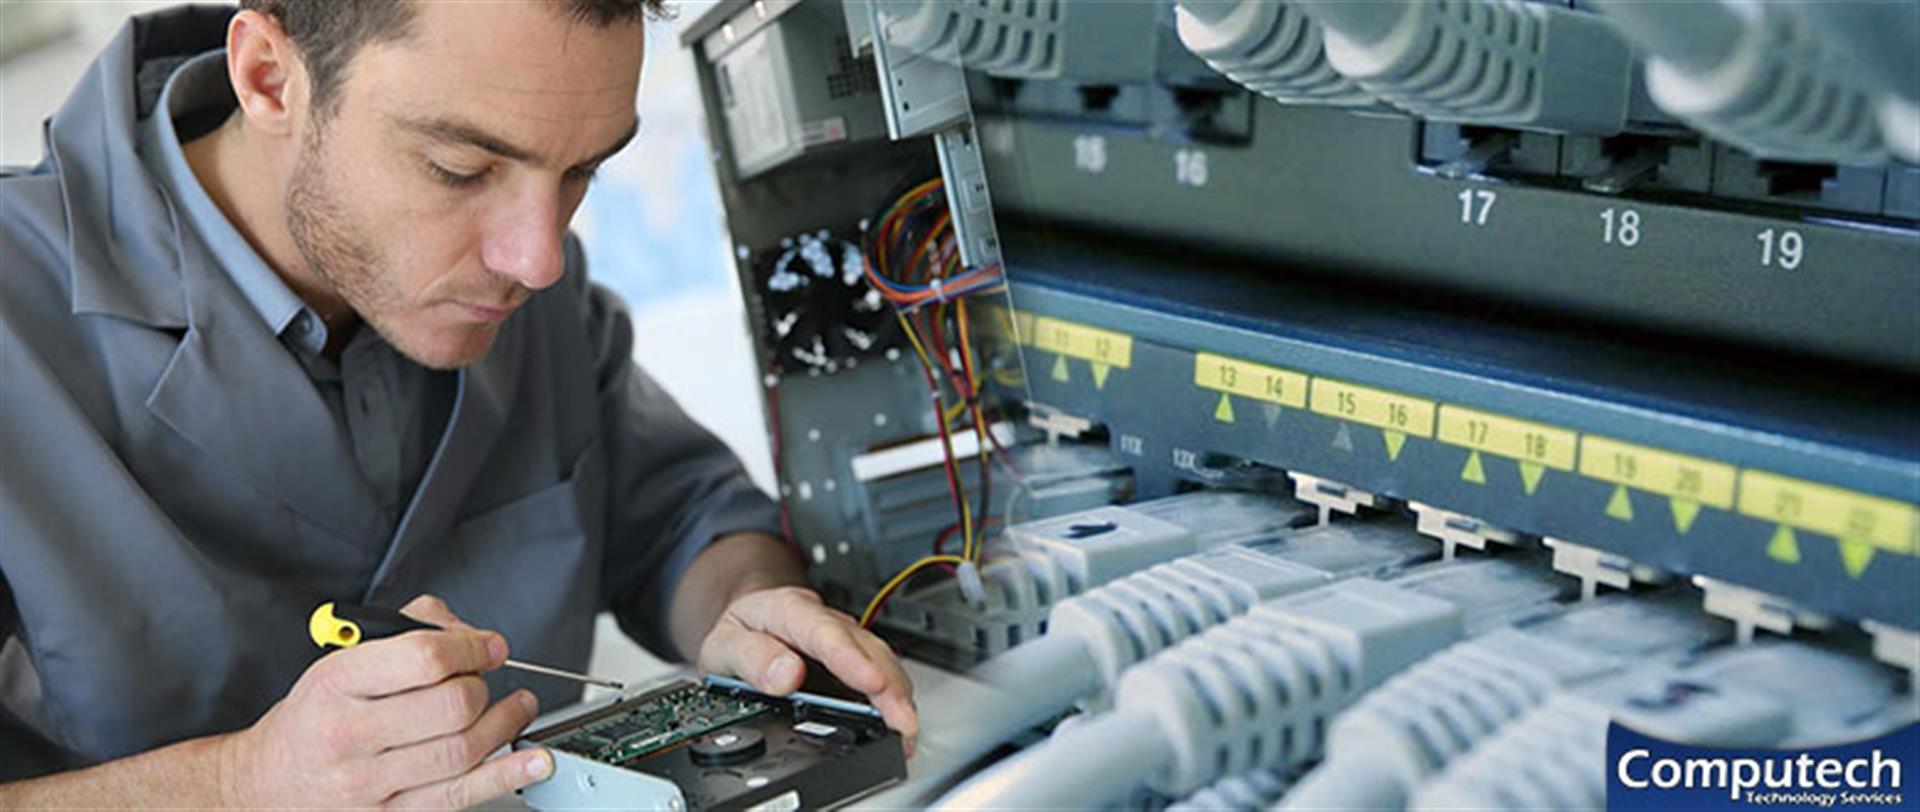 Benson Arizona On-Site PC & Printer Repair, Networking, Voice and Data Low Voltage Cabling Solutions